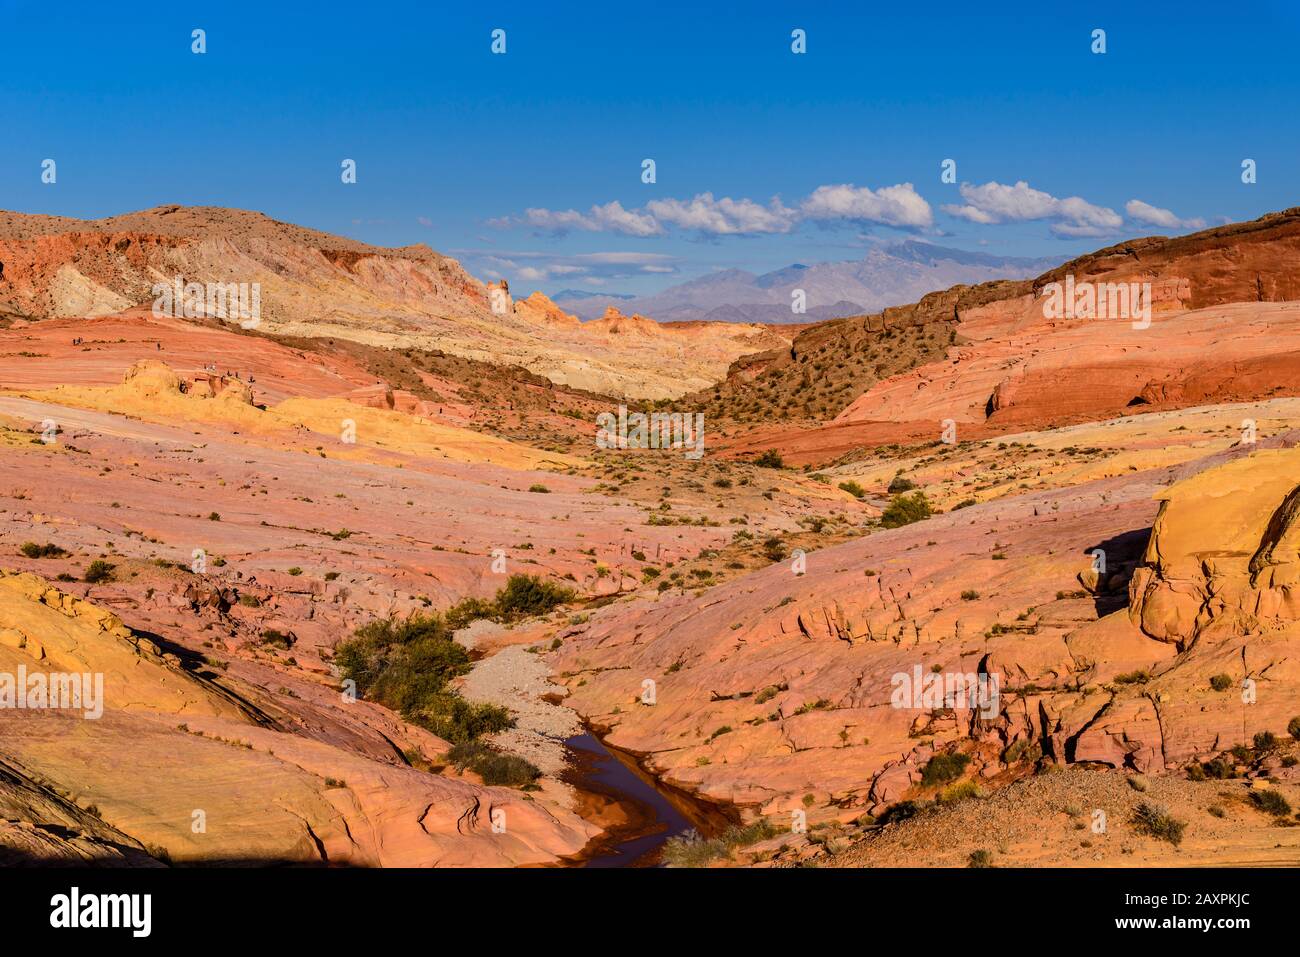 USA, Nevada, Clark County, Overton, Valley of Fire State Park, Pink Canyon Stockfoto